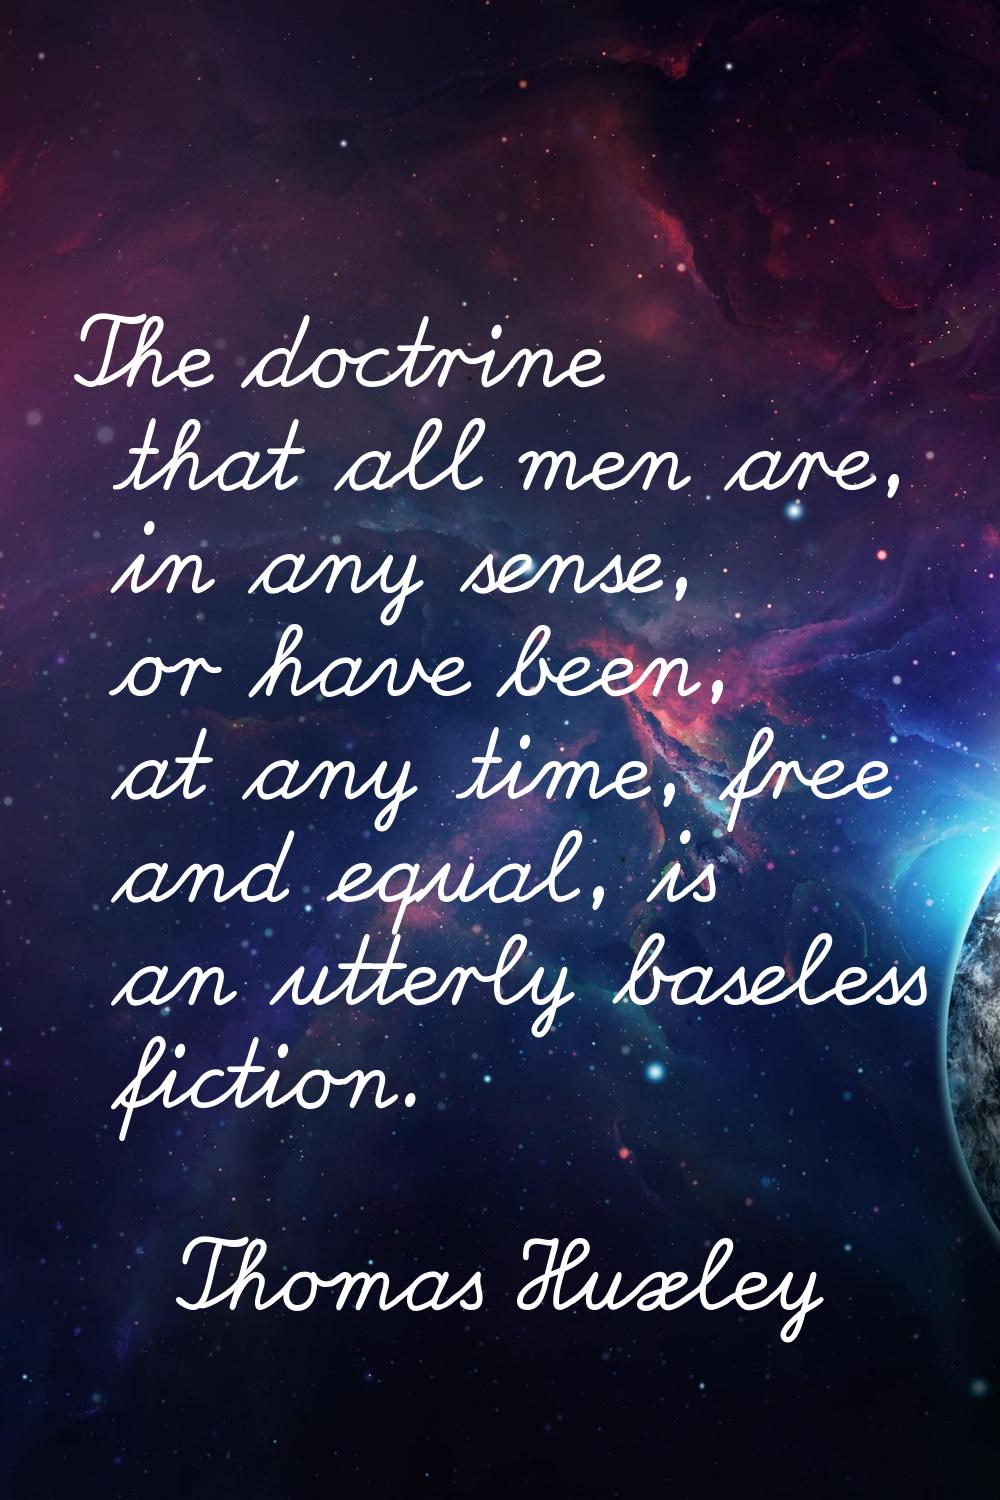 The doctrine that all men are, in any sense, or have been, at any time, free and equal, is an utter